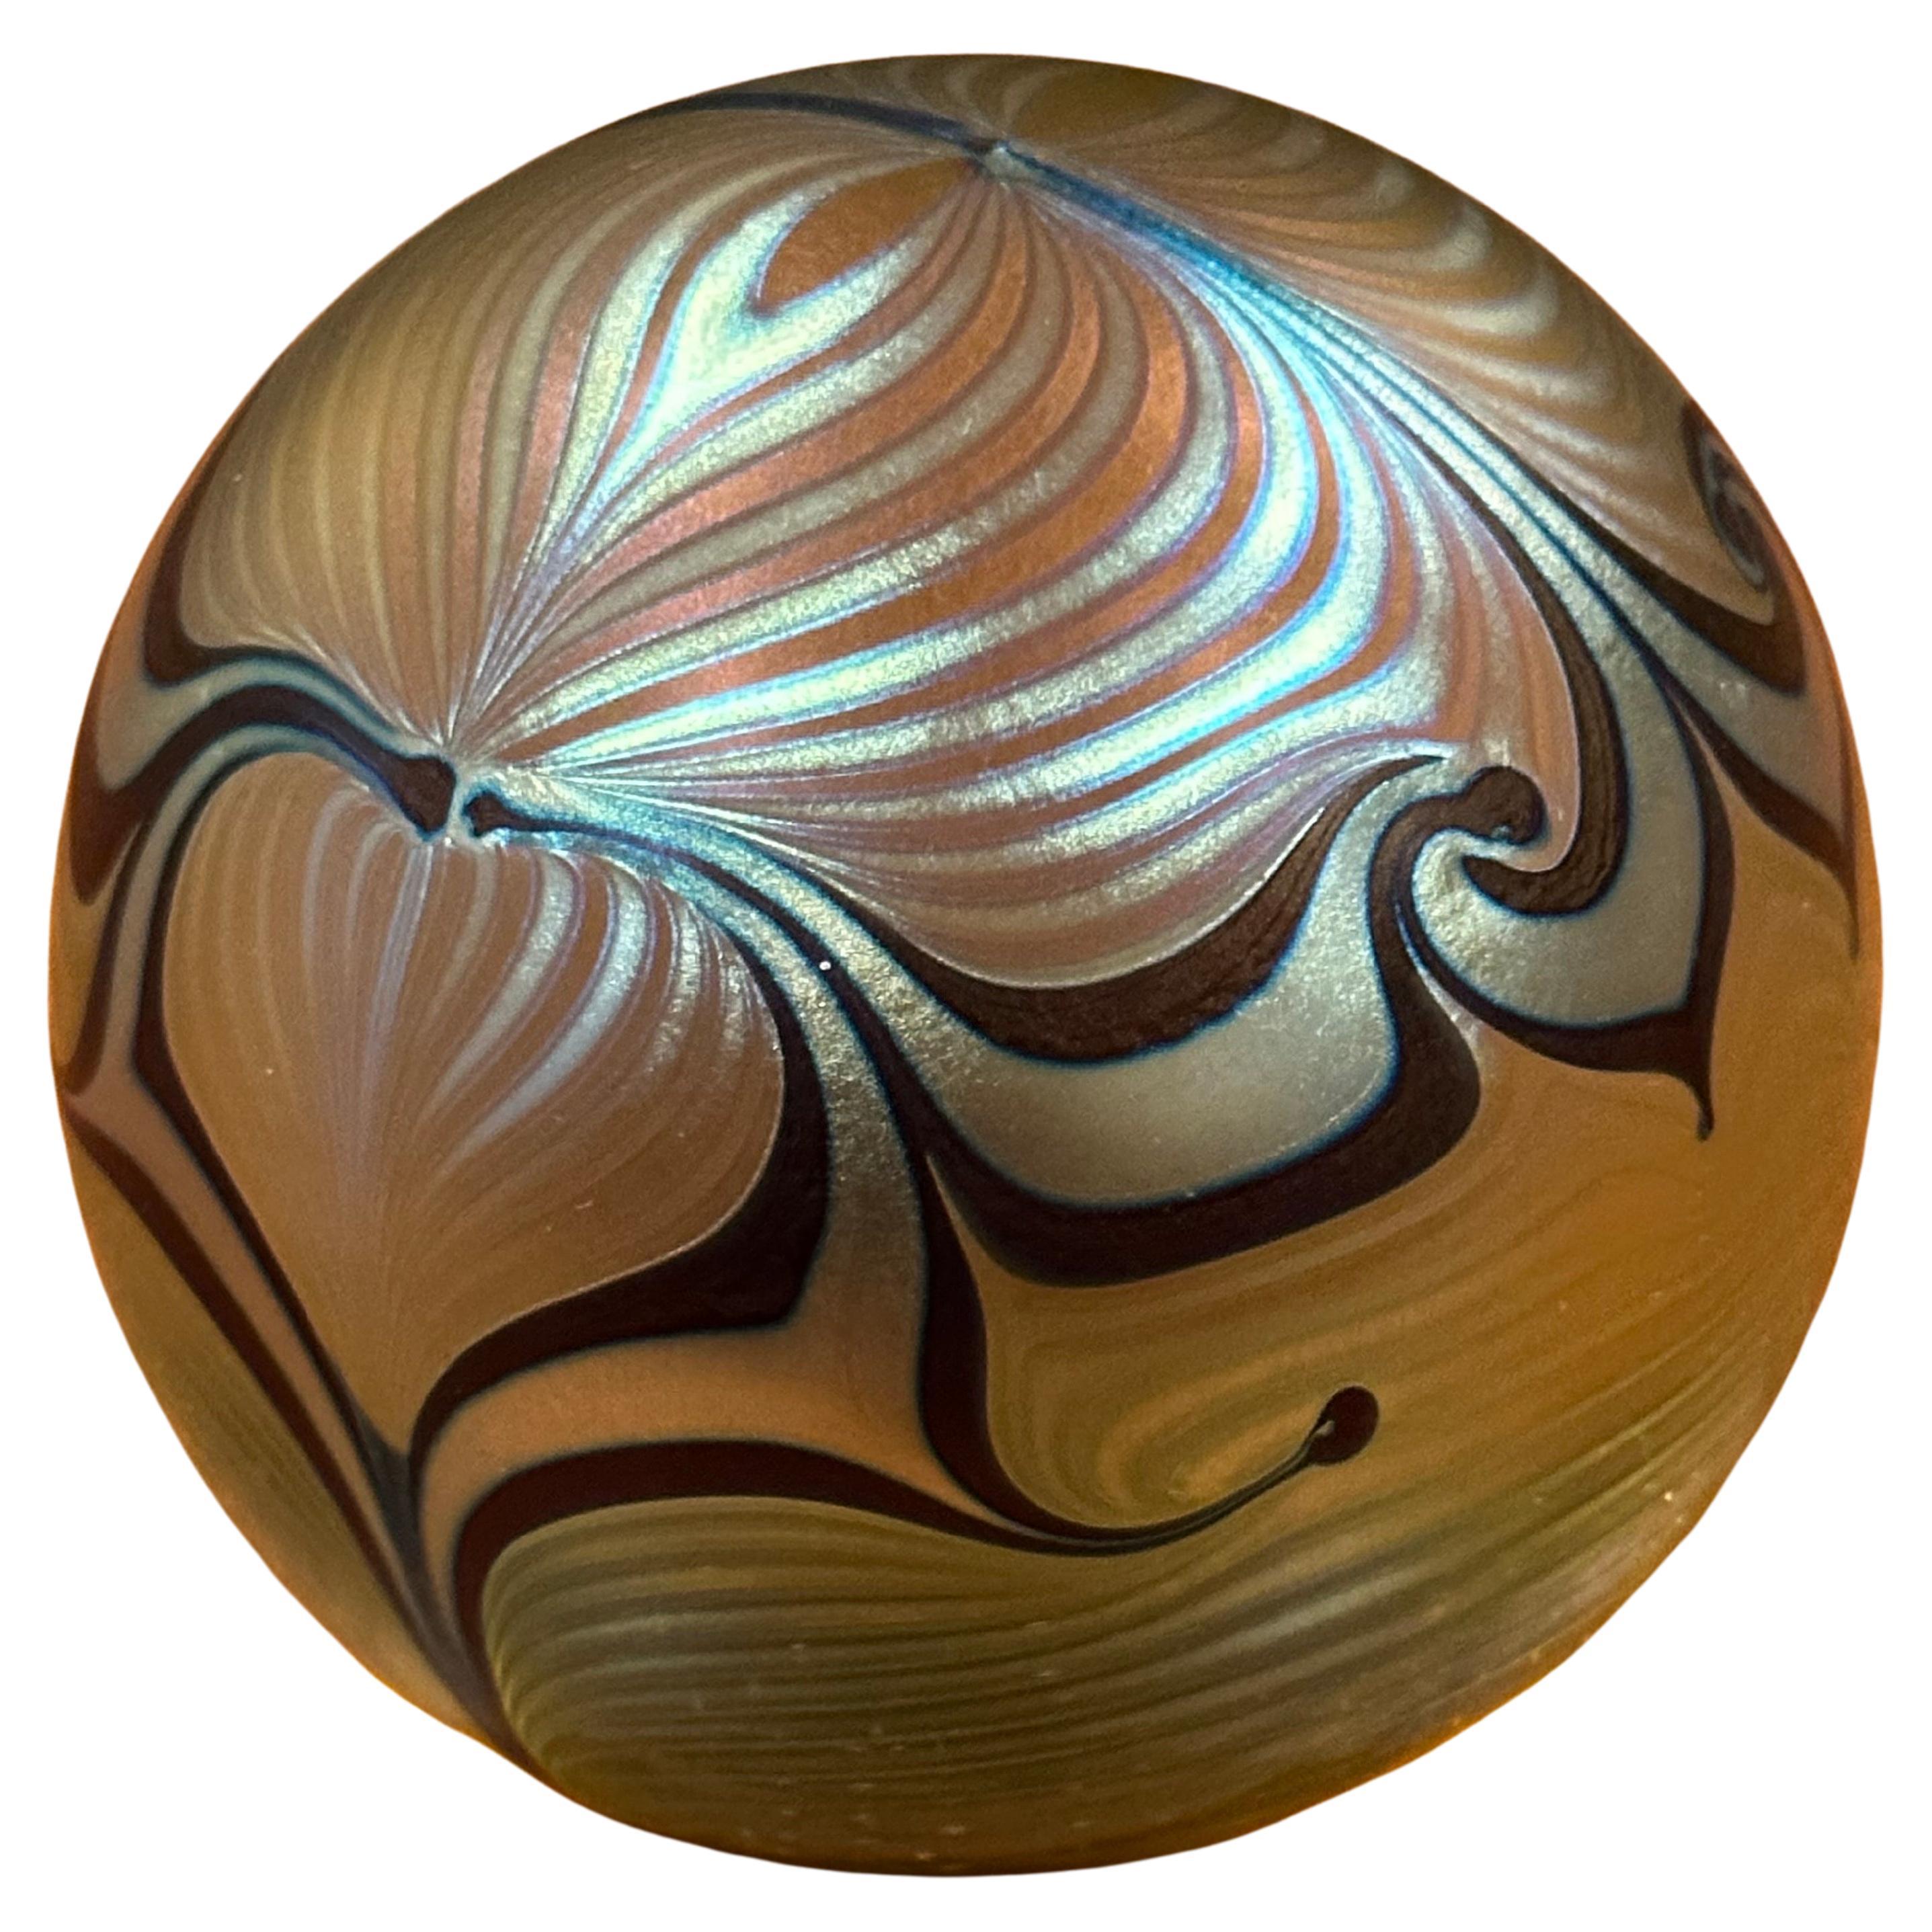 Iridescent Art Glass Paperweight by Steven Correia For Sale 4